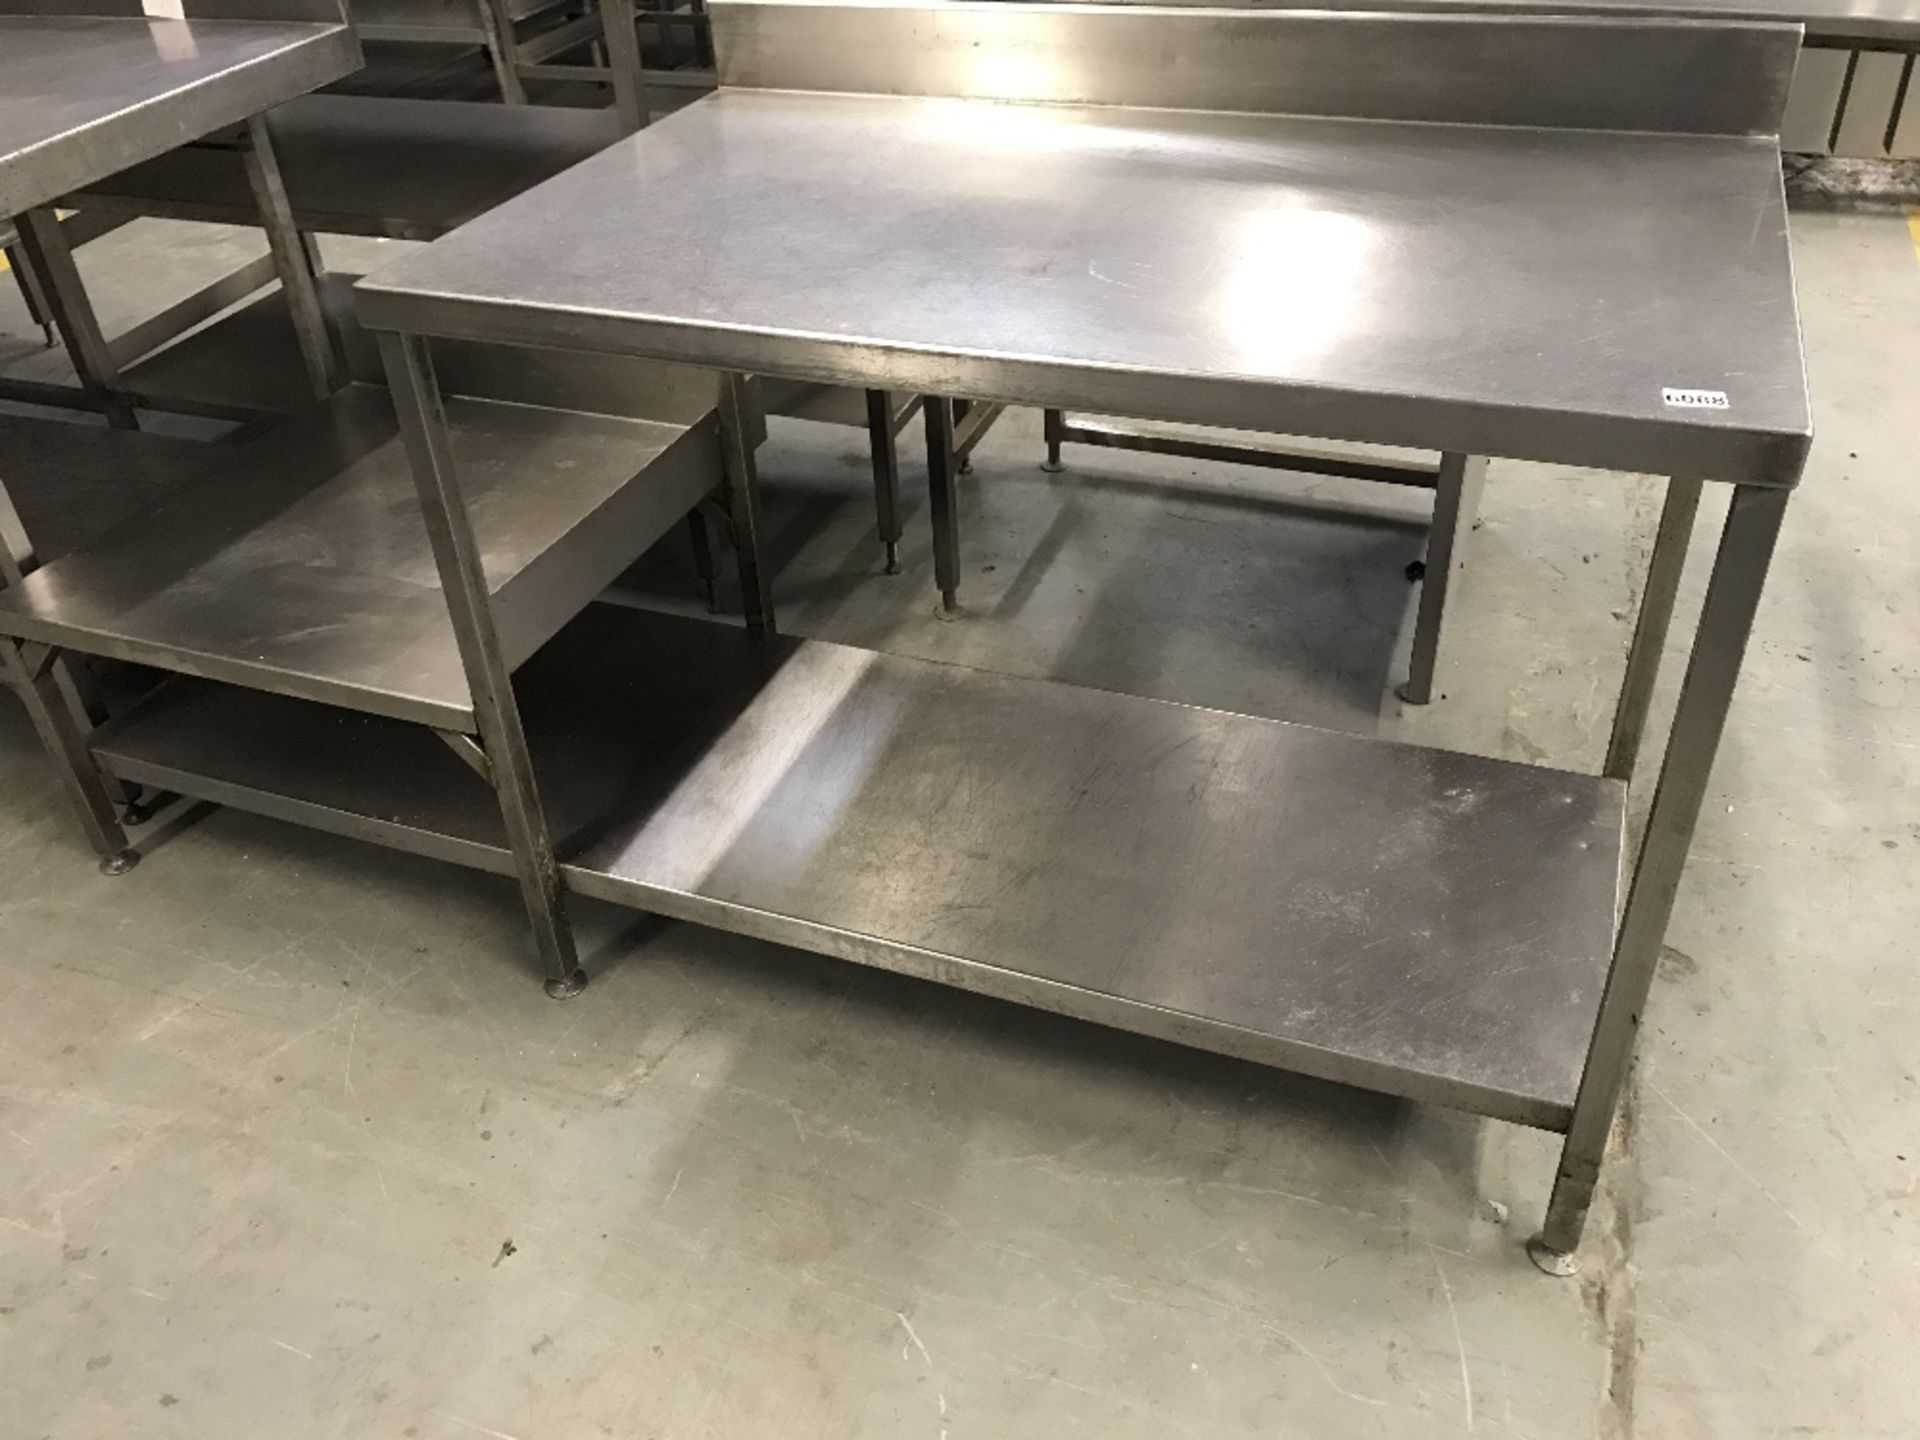 Wall Table with undershelf and stand for Dishwasher 1840 x 700mm